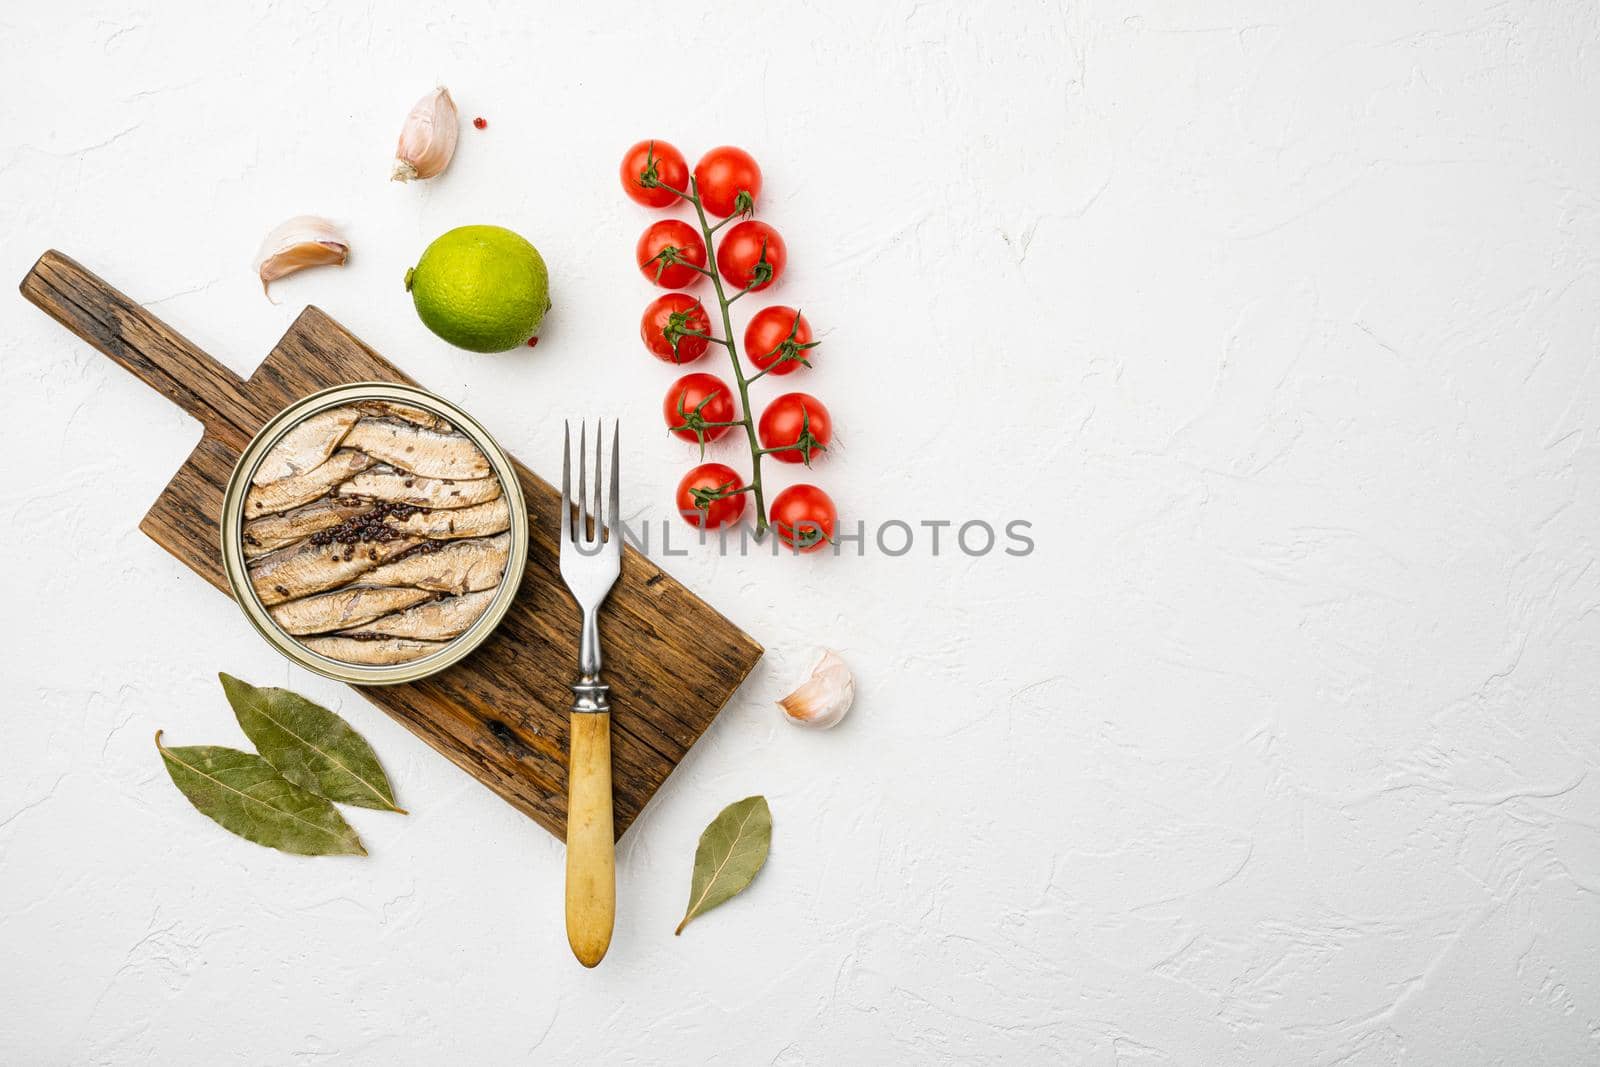 Smoked fish with olive oil, on white stone table background, top view flat lay, with copy space for text by Ilianesolenyi